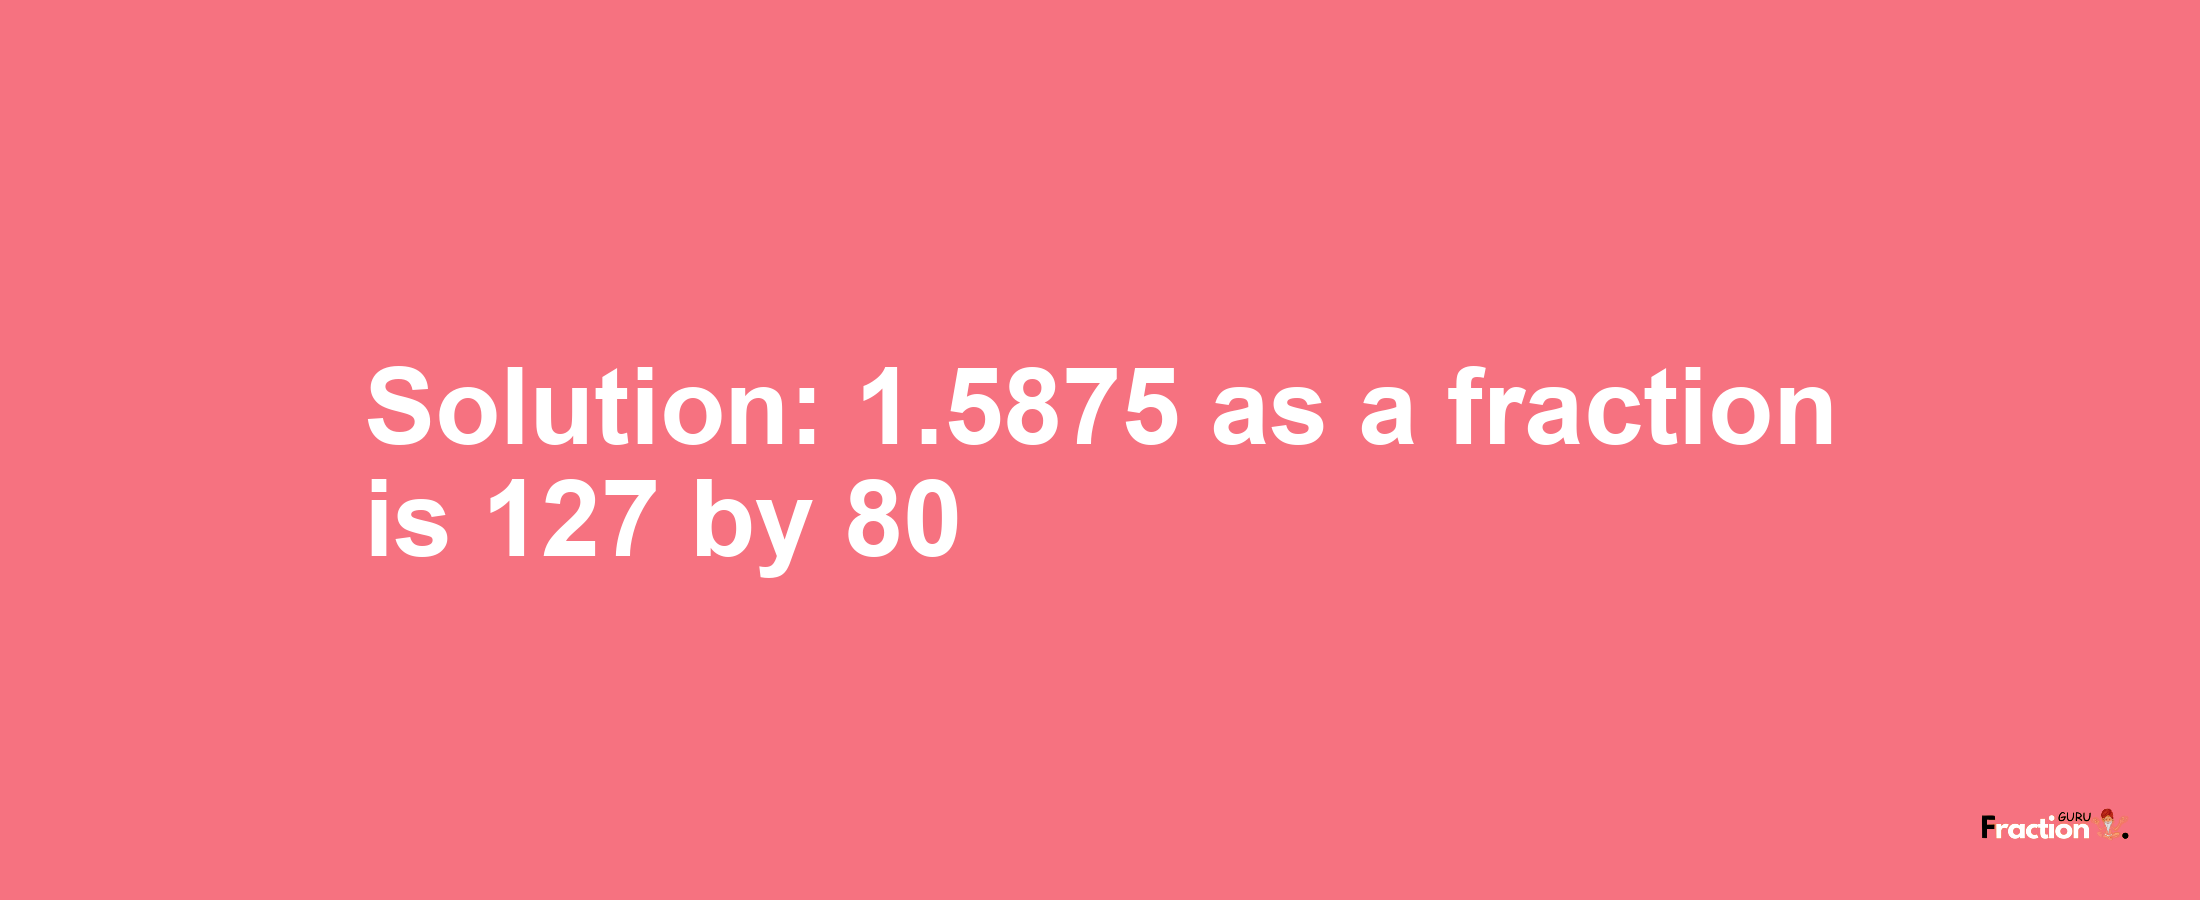 Solution:1.5875 as a fraction is 127/80